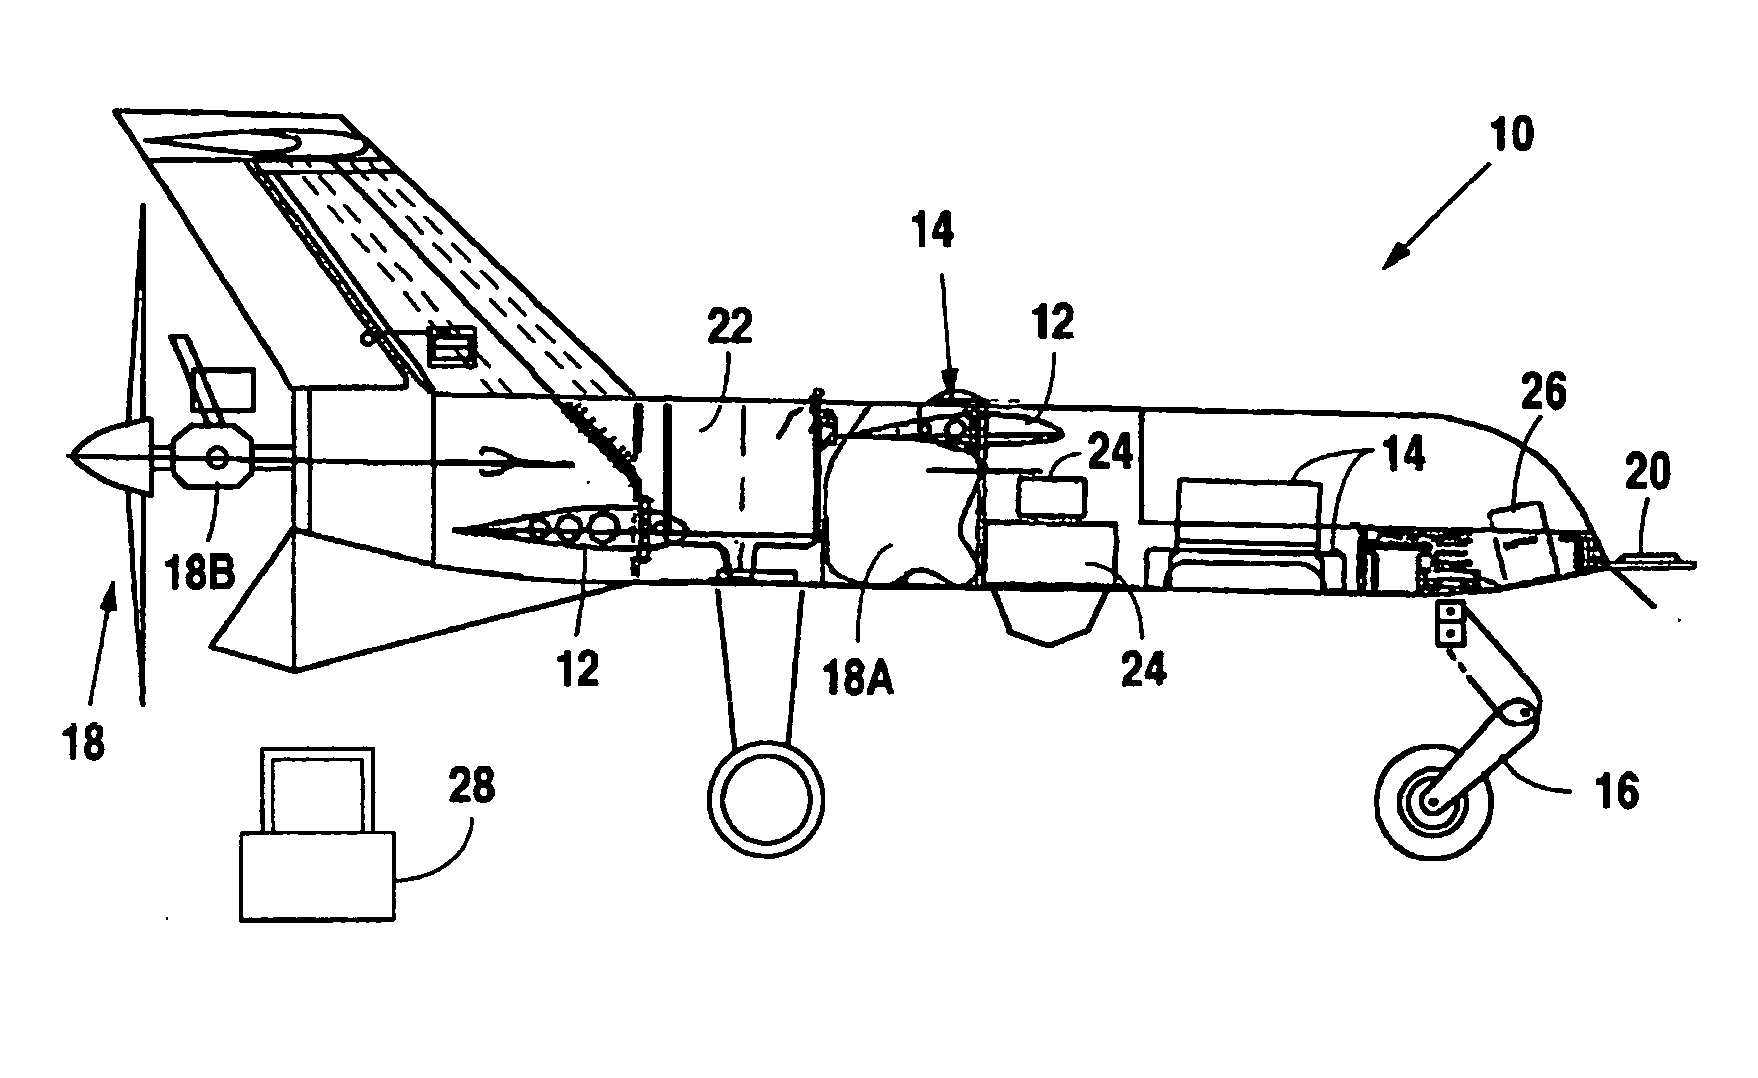 Unmanned biplane for airborne reconnaissance and surveillance having staggered and gapped wings